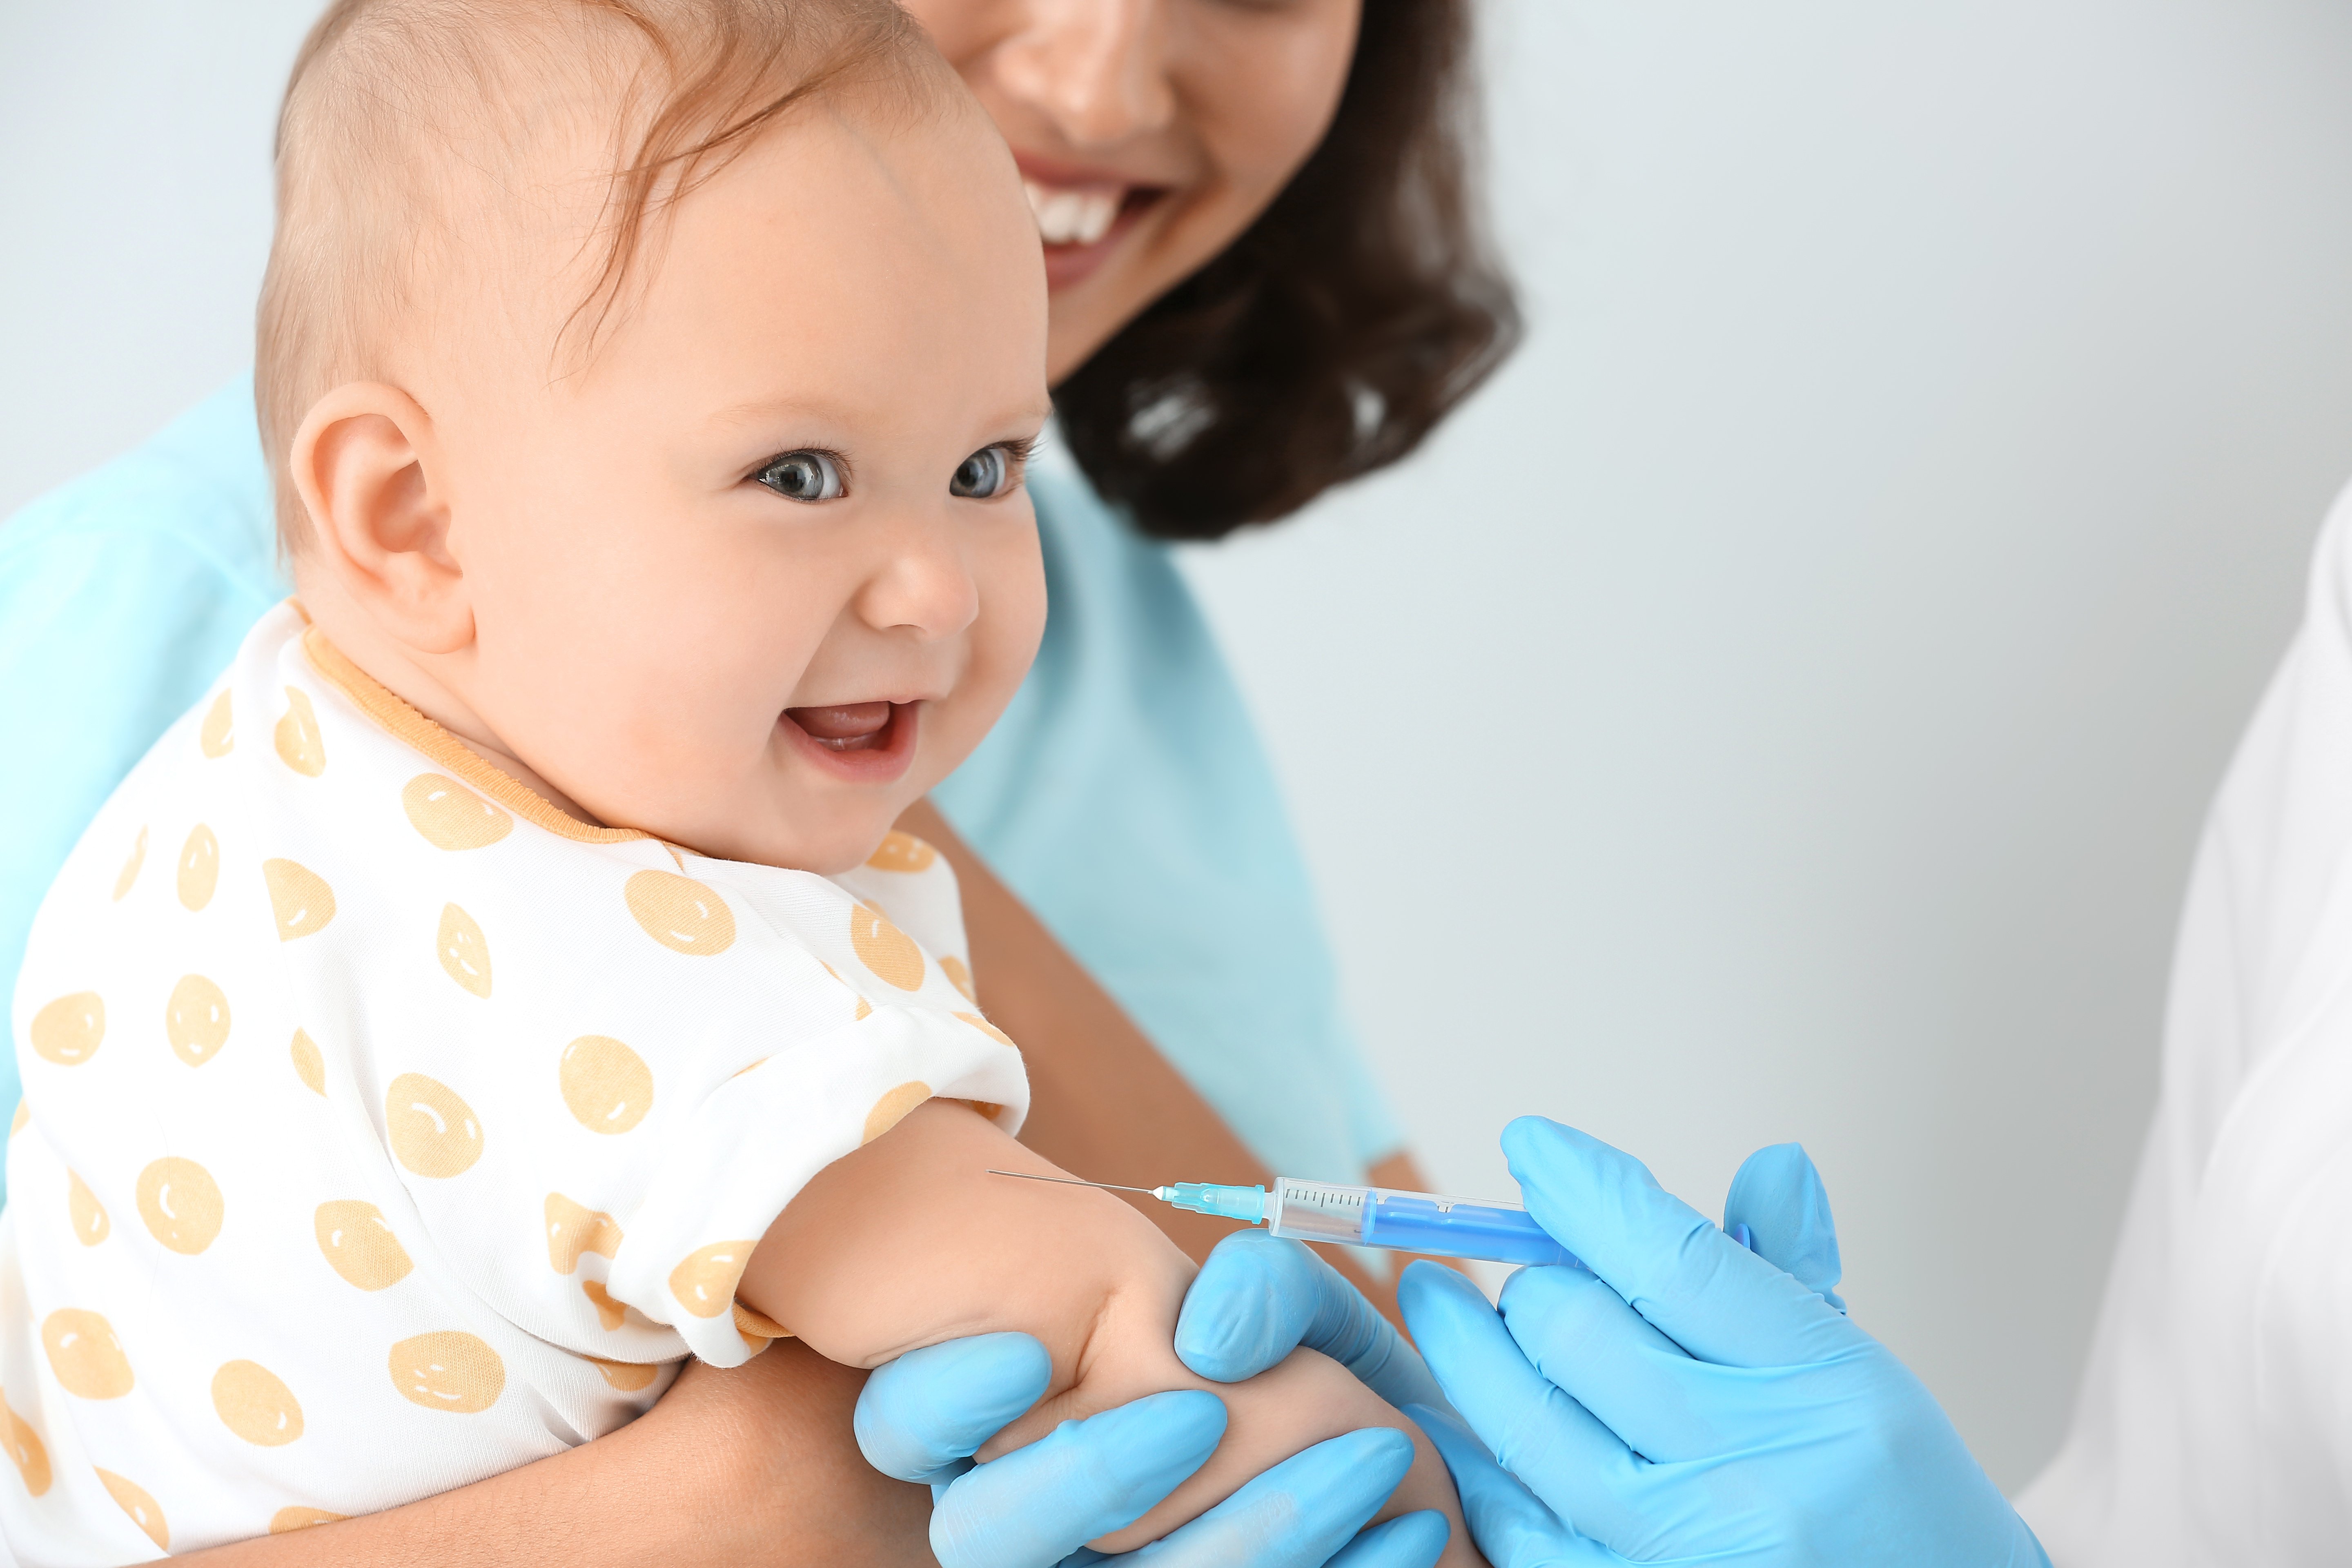 The Safety, Importance and Effectiveness of Infant Immunizations